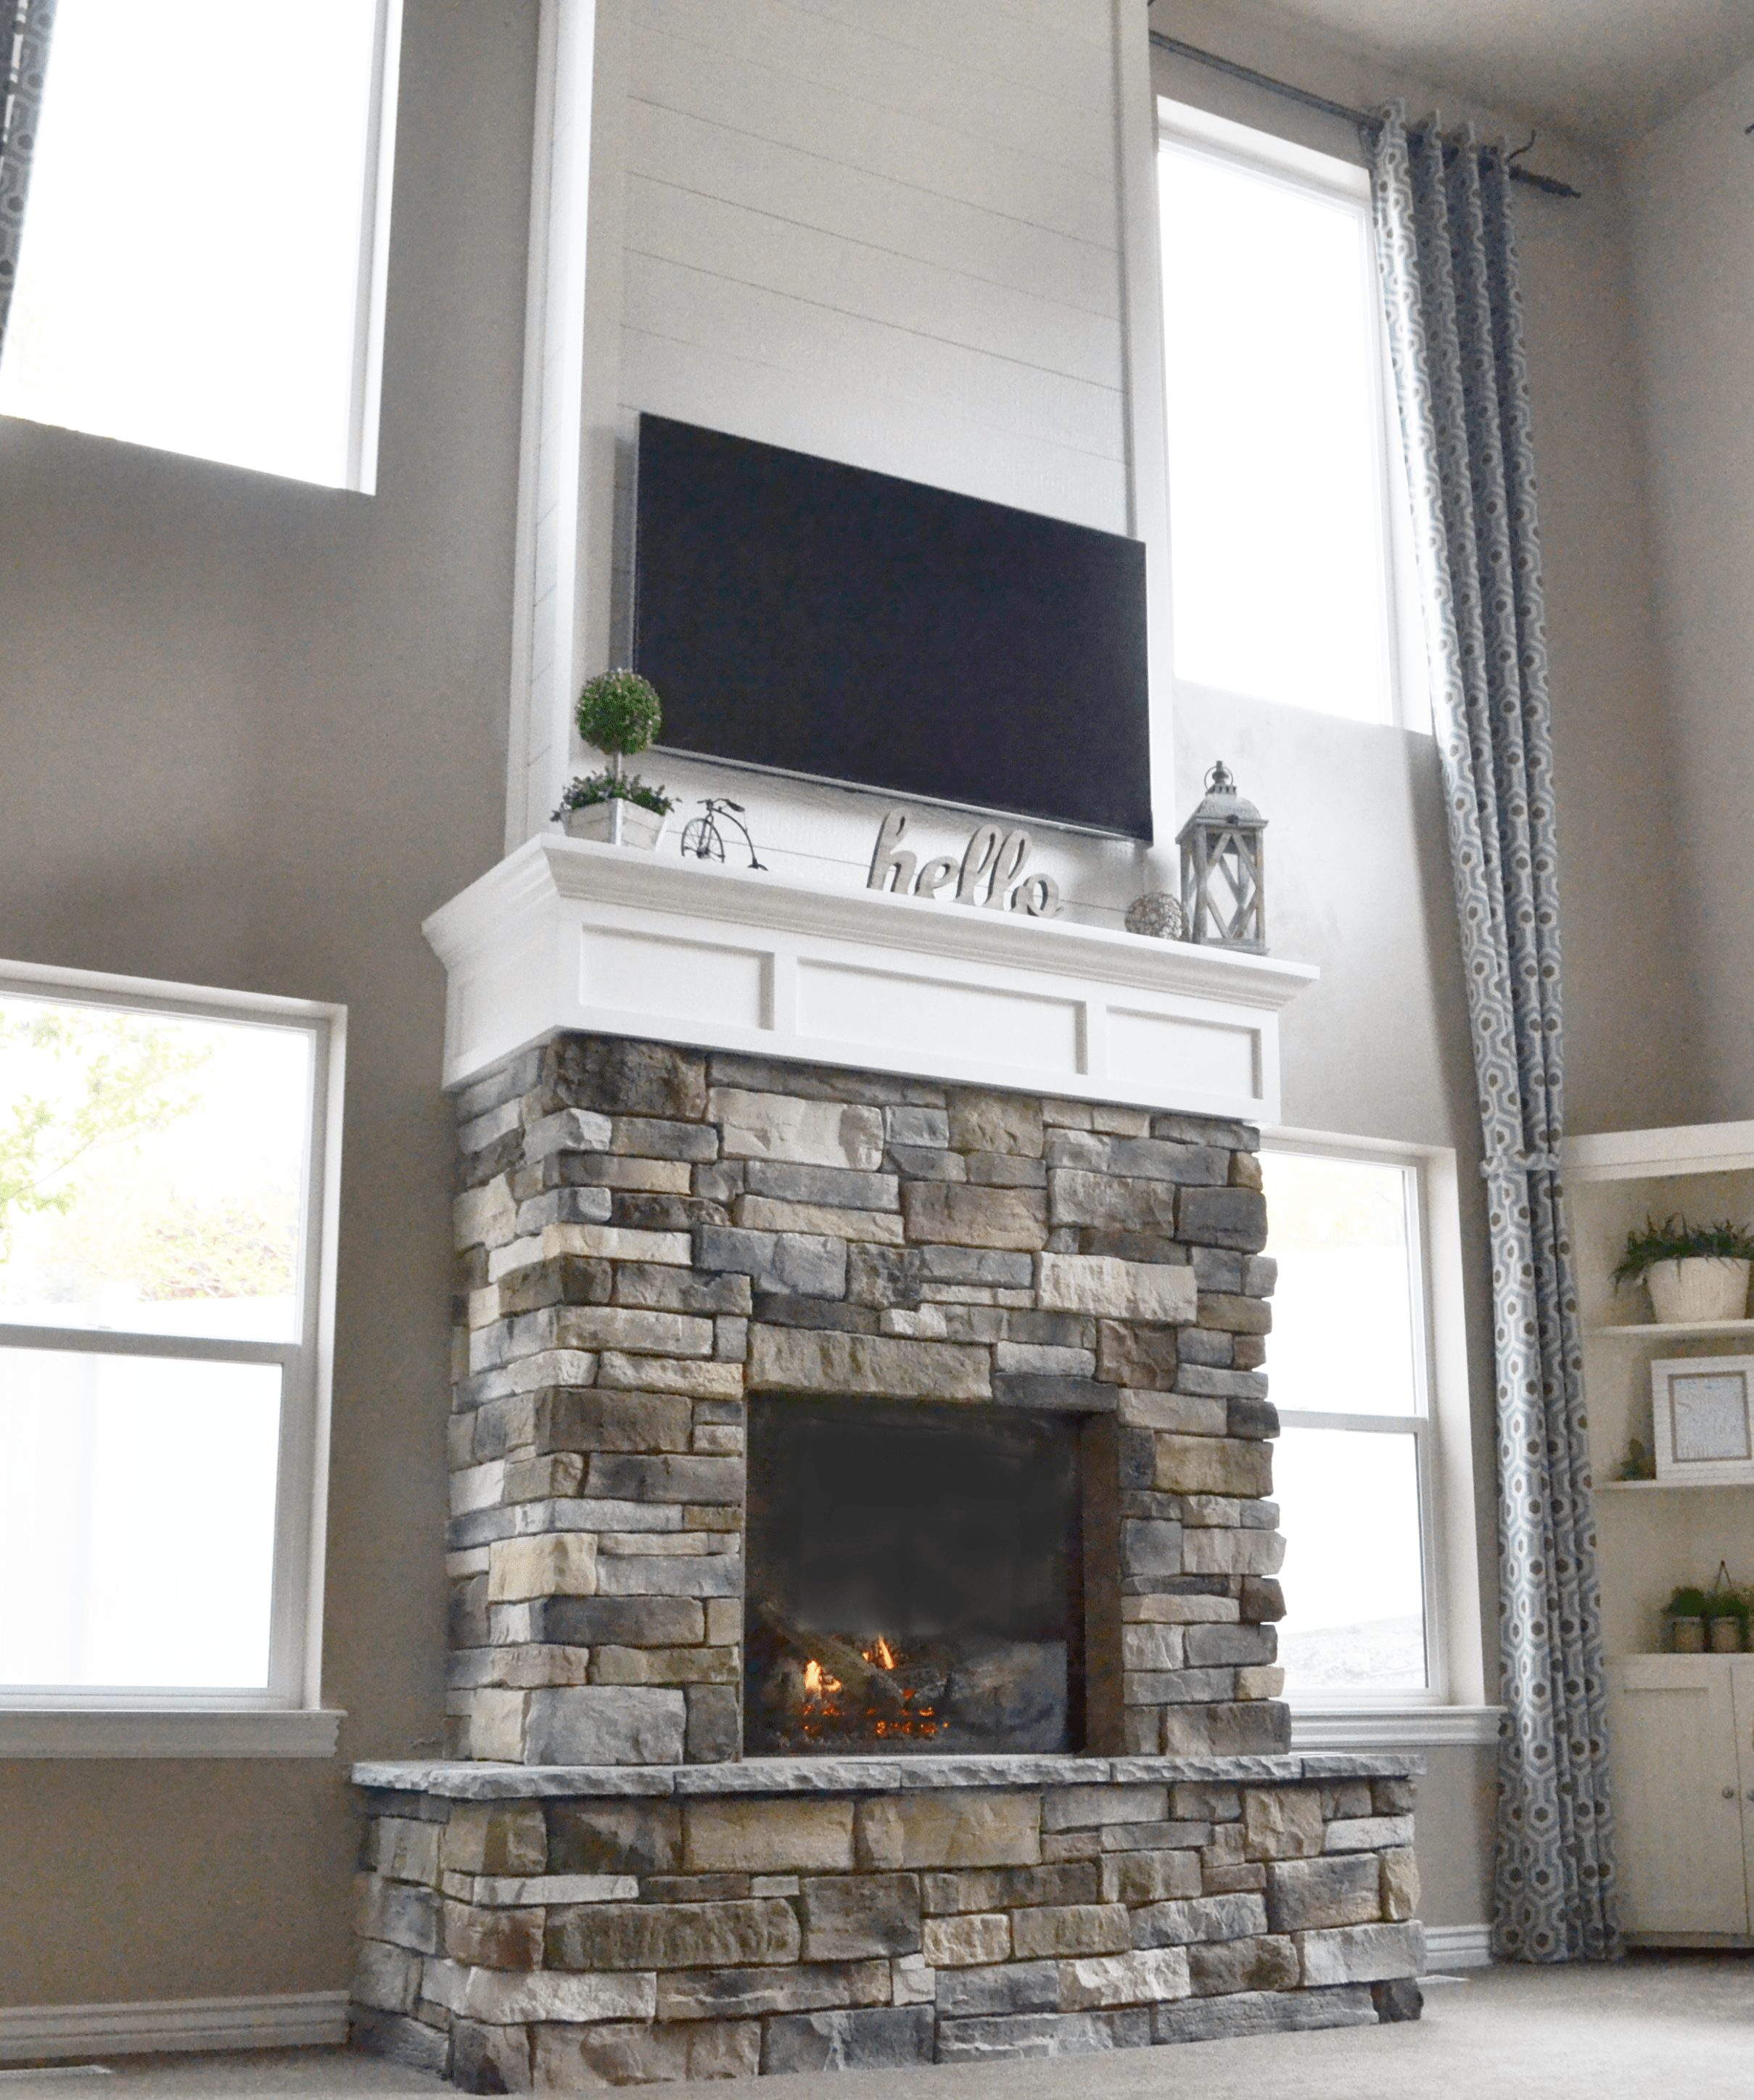 How to Install Stone On Fireplace New Diy Fireplace with Stone & Shiplap